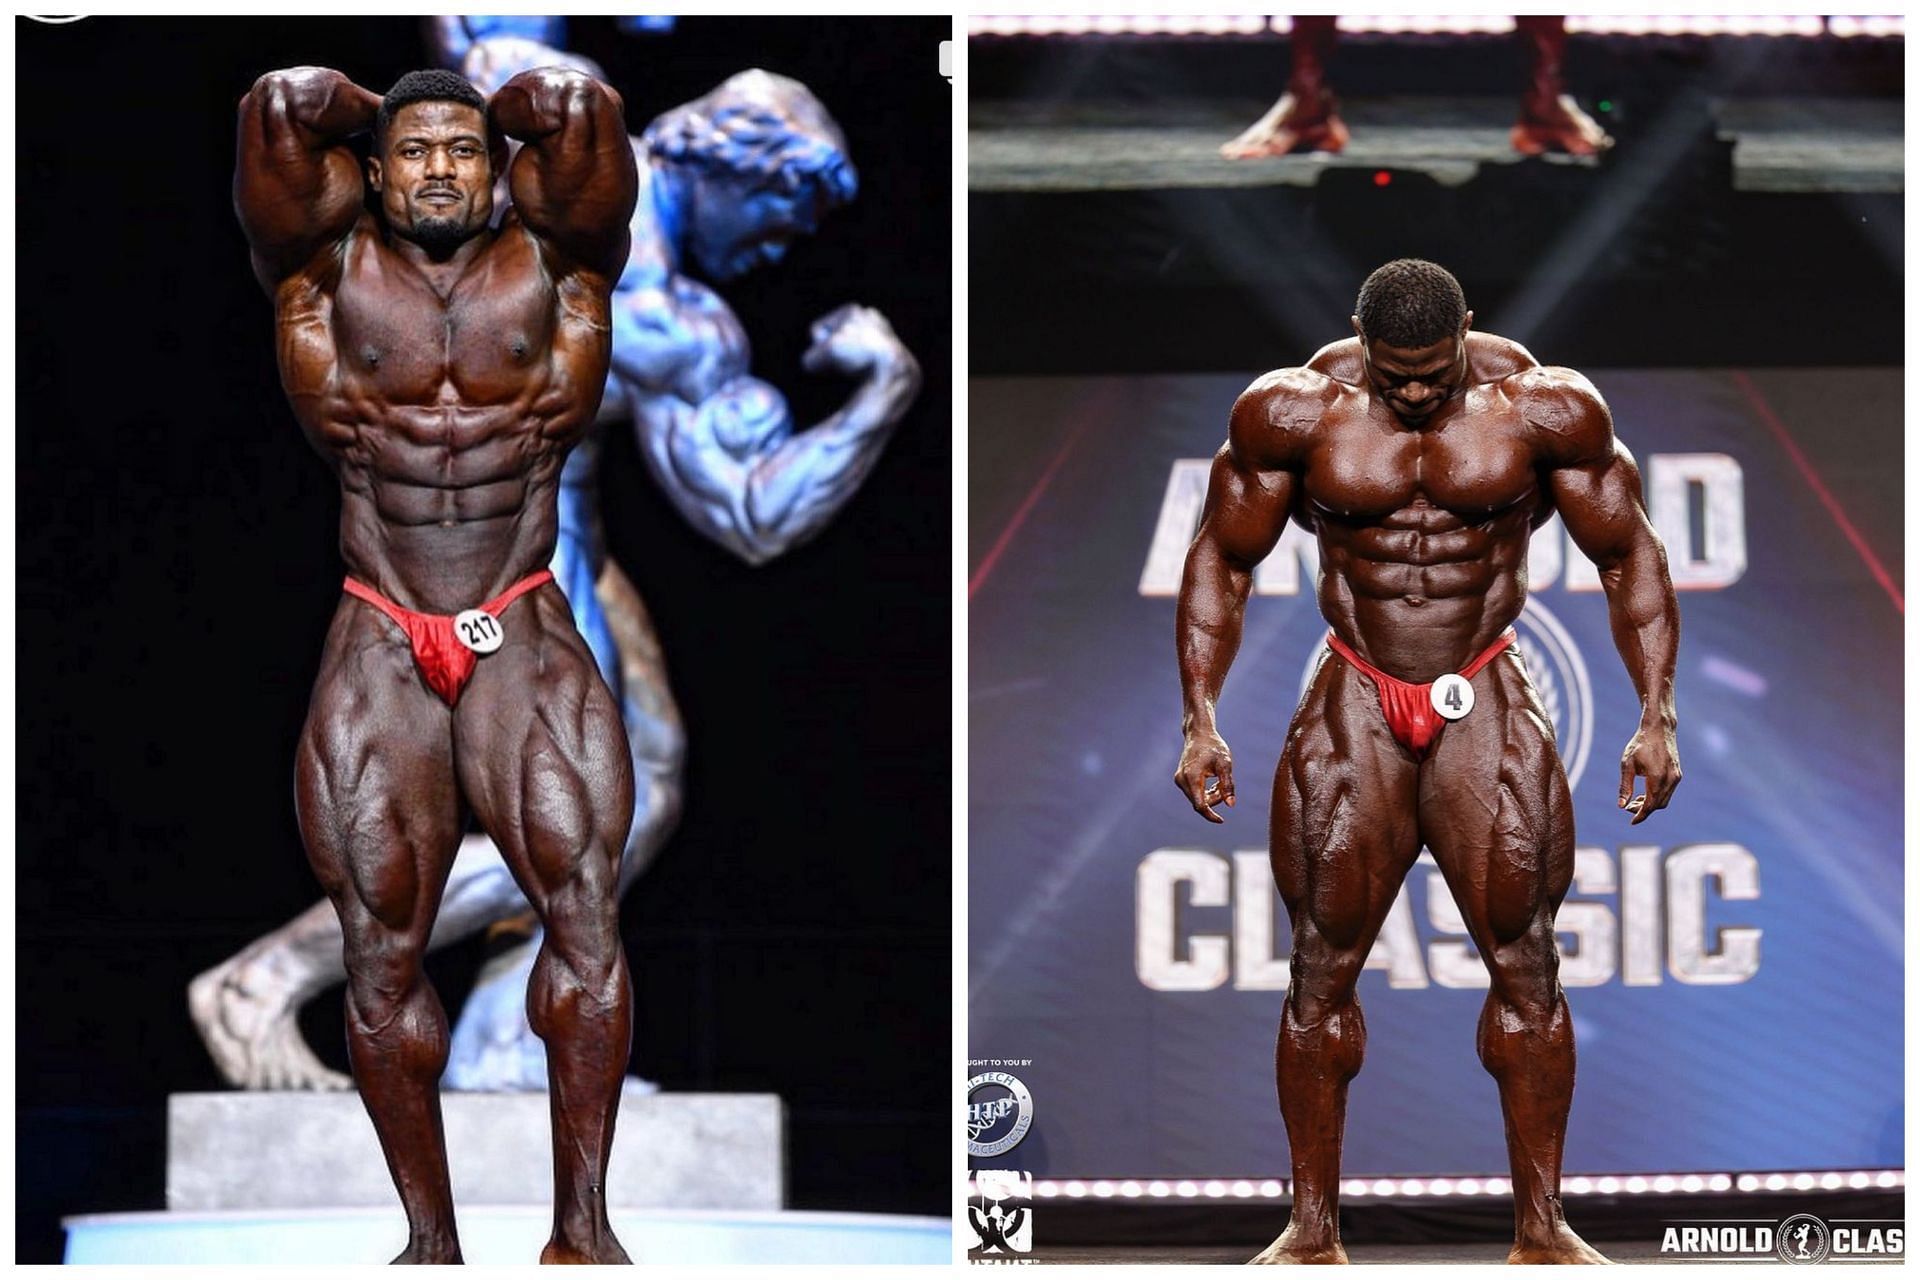 Andrew Jacked poses at the 2023 Arnold Classic: Image via Instagram (@andrewjacked)